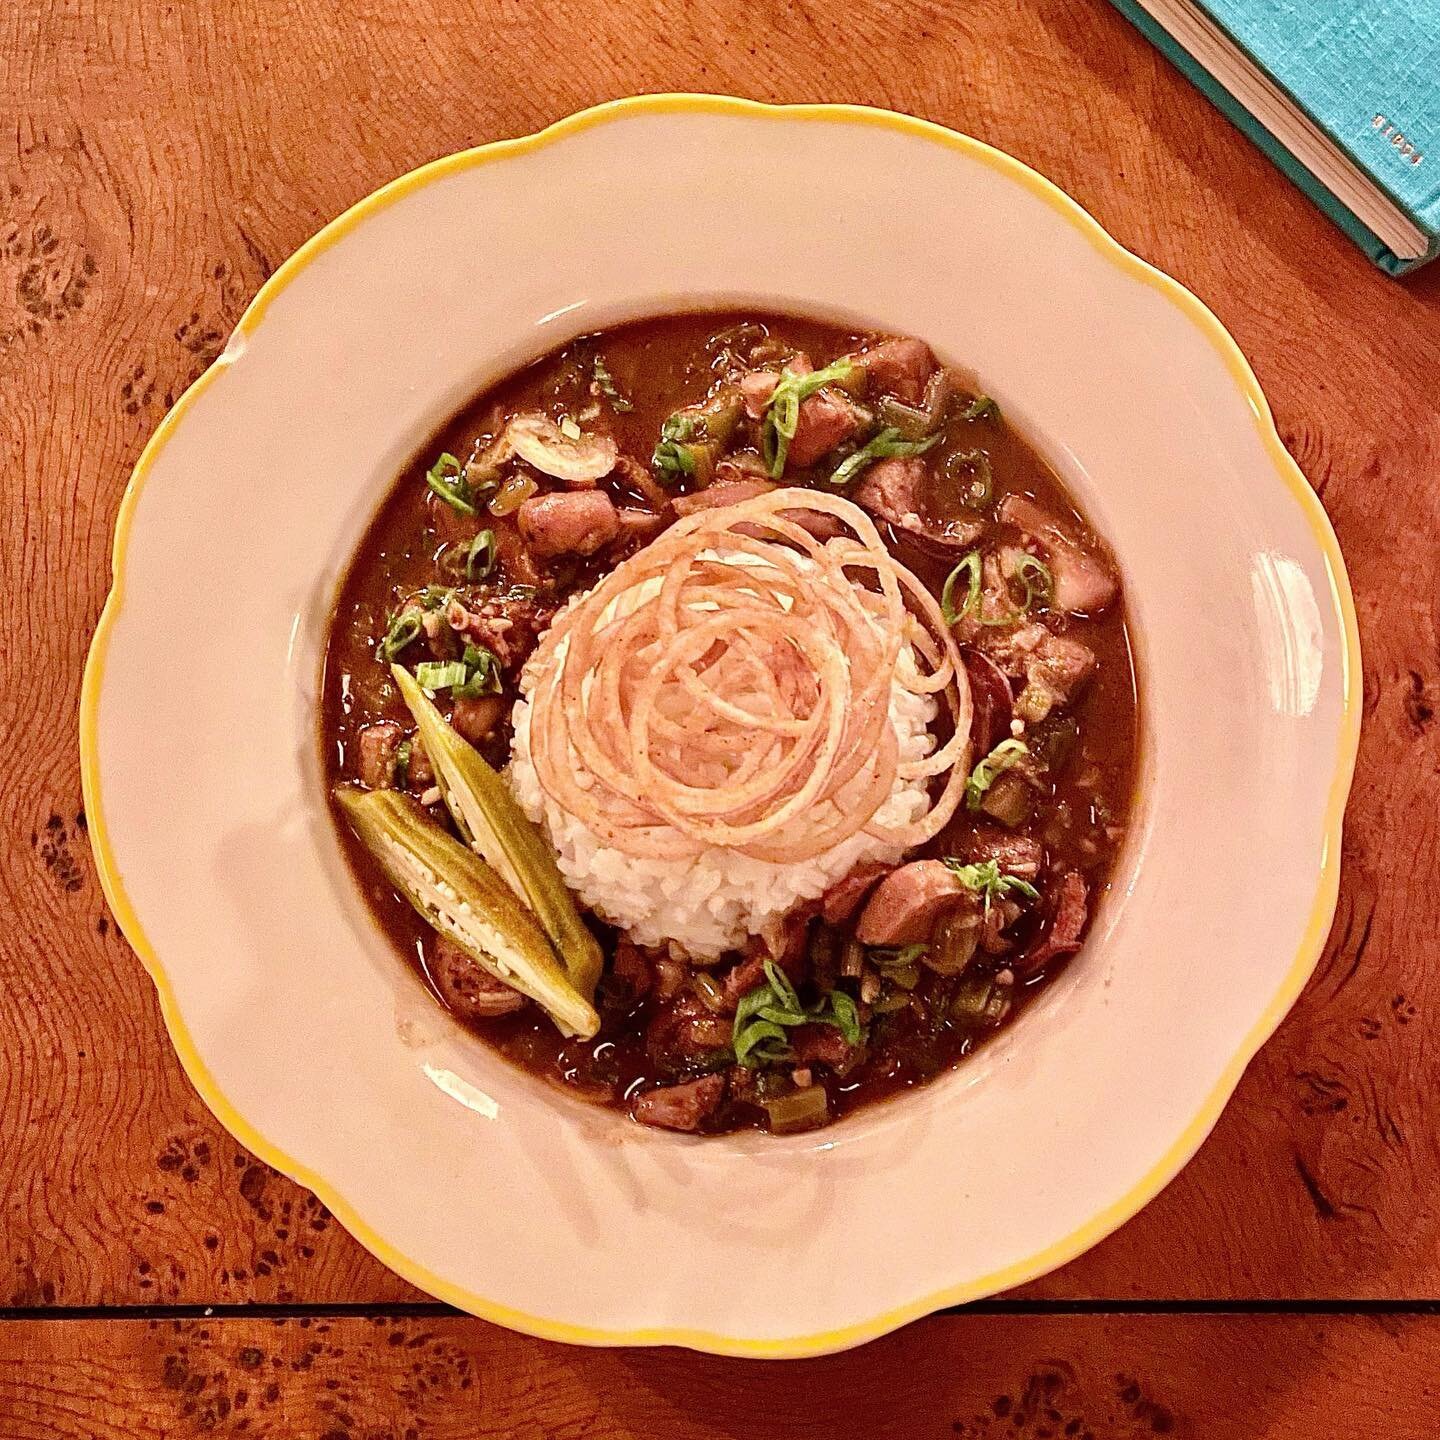 We serve a traditional New Orleans gumbo every Wednesday. Reminds us of home&hellip;